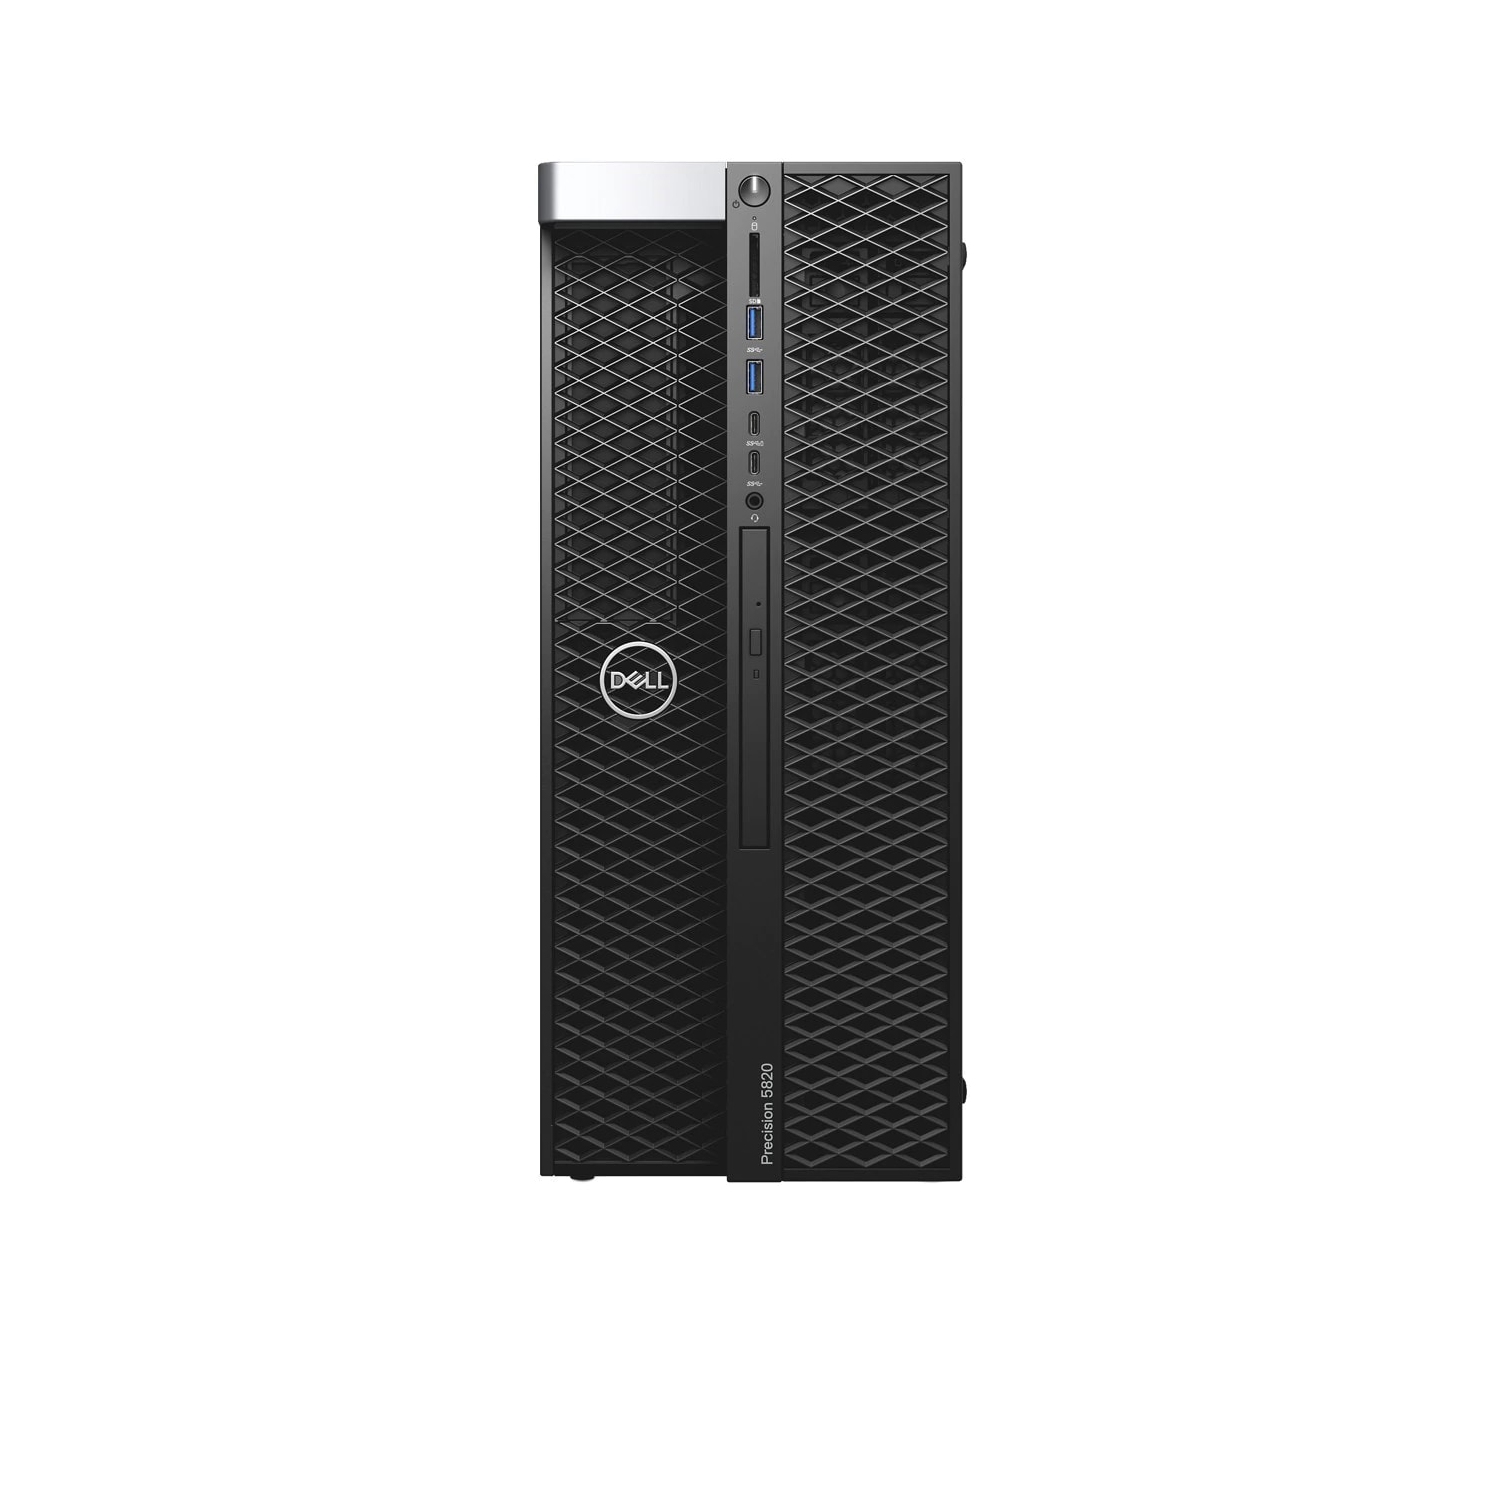 Refurbished (Excellent) - Dell Precision T5820 Workstation Desktop (2018), Core i9, 1TB HDD, 64GB RAM, RTX 4000, 10 Cores @ 4.5 GHz, 10th Gen CPU Certified Refurbished